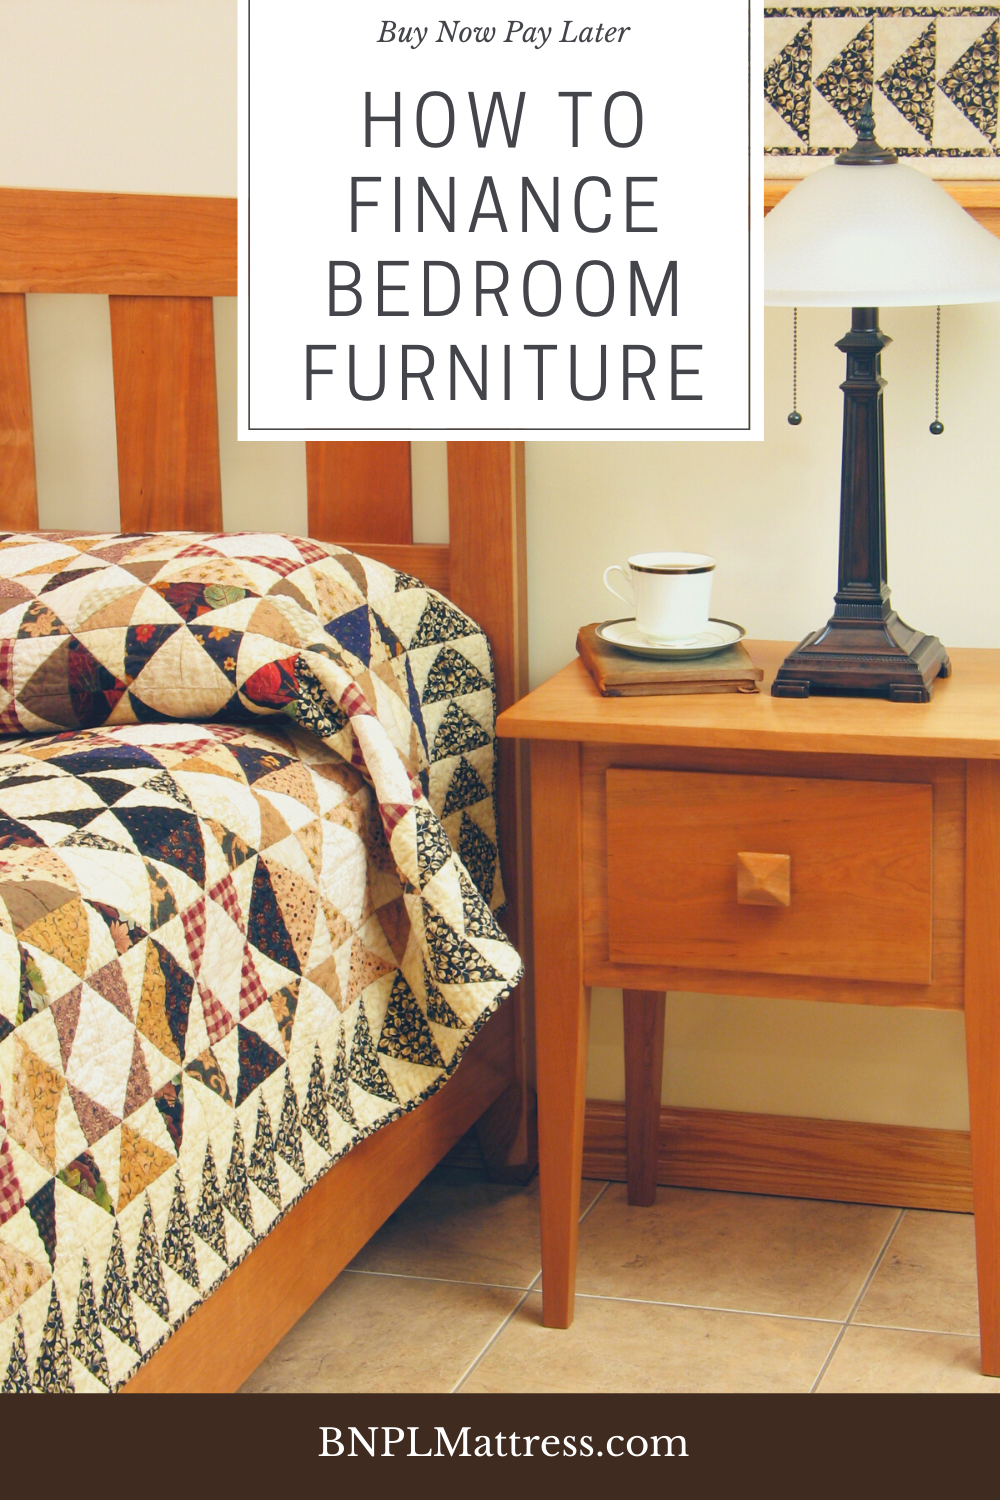 how to finance bedroom furniture